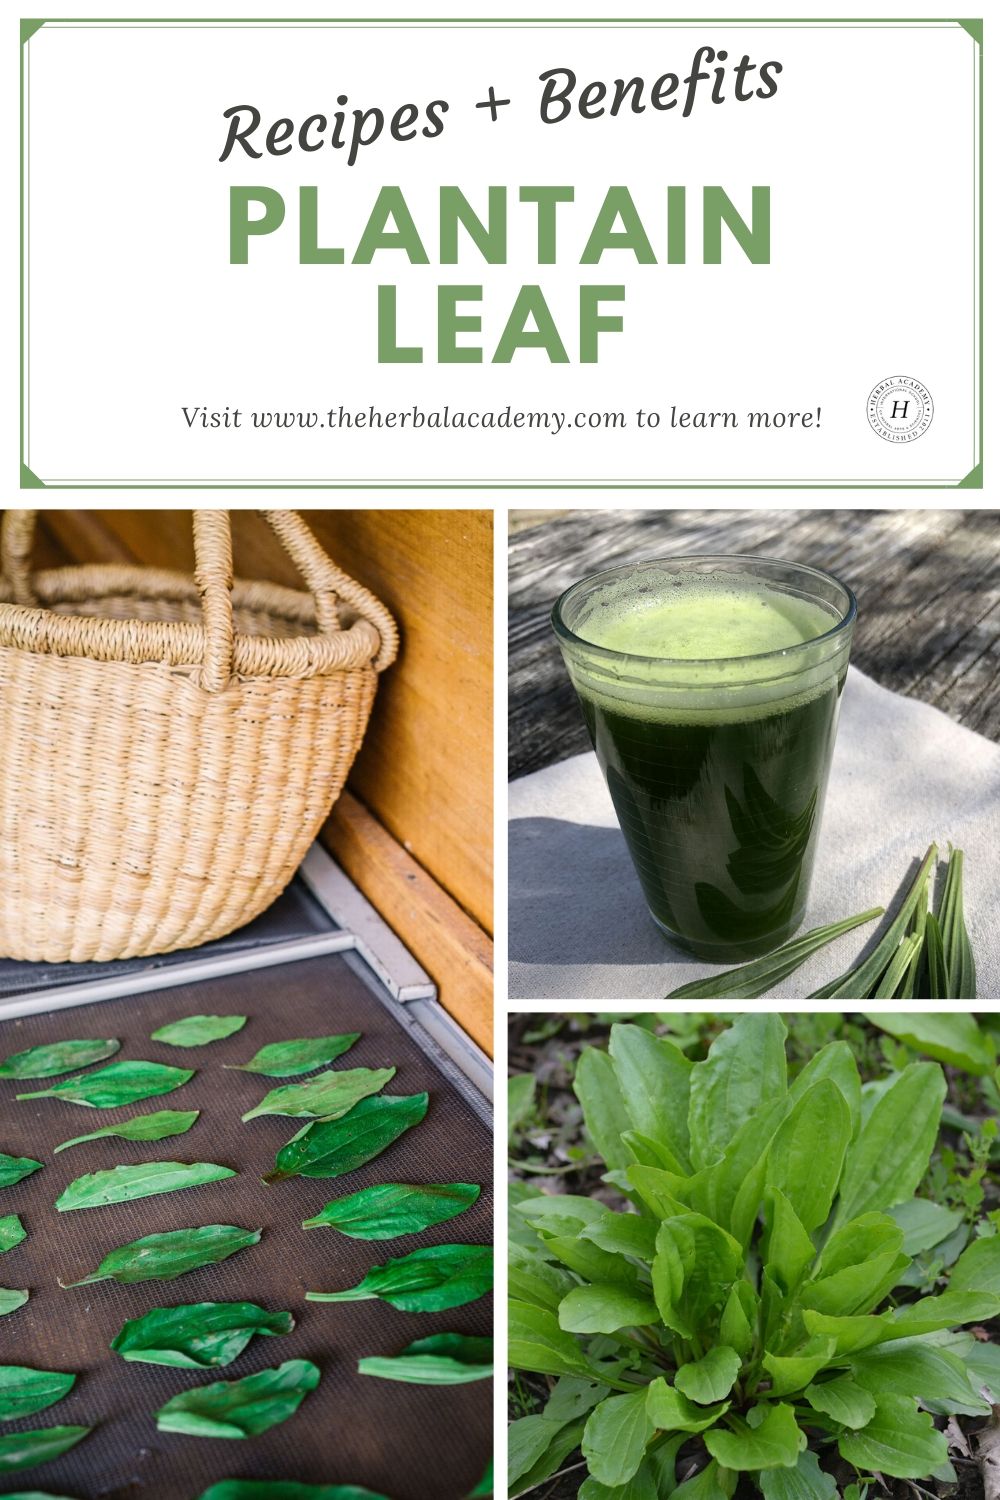 Plantain Leaf Benefits and Recipes | Herbal Academy | Learn the many benefits of plantain leaf (Plantago spp.) and how to use it in two simple recipes, a juice and a face mask.